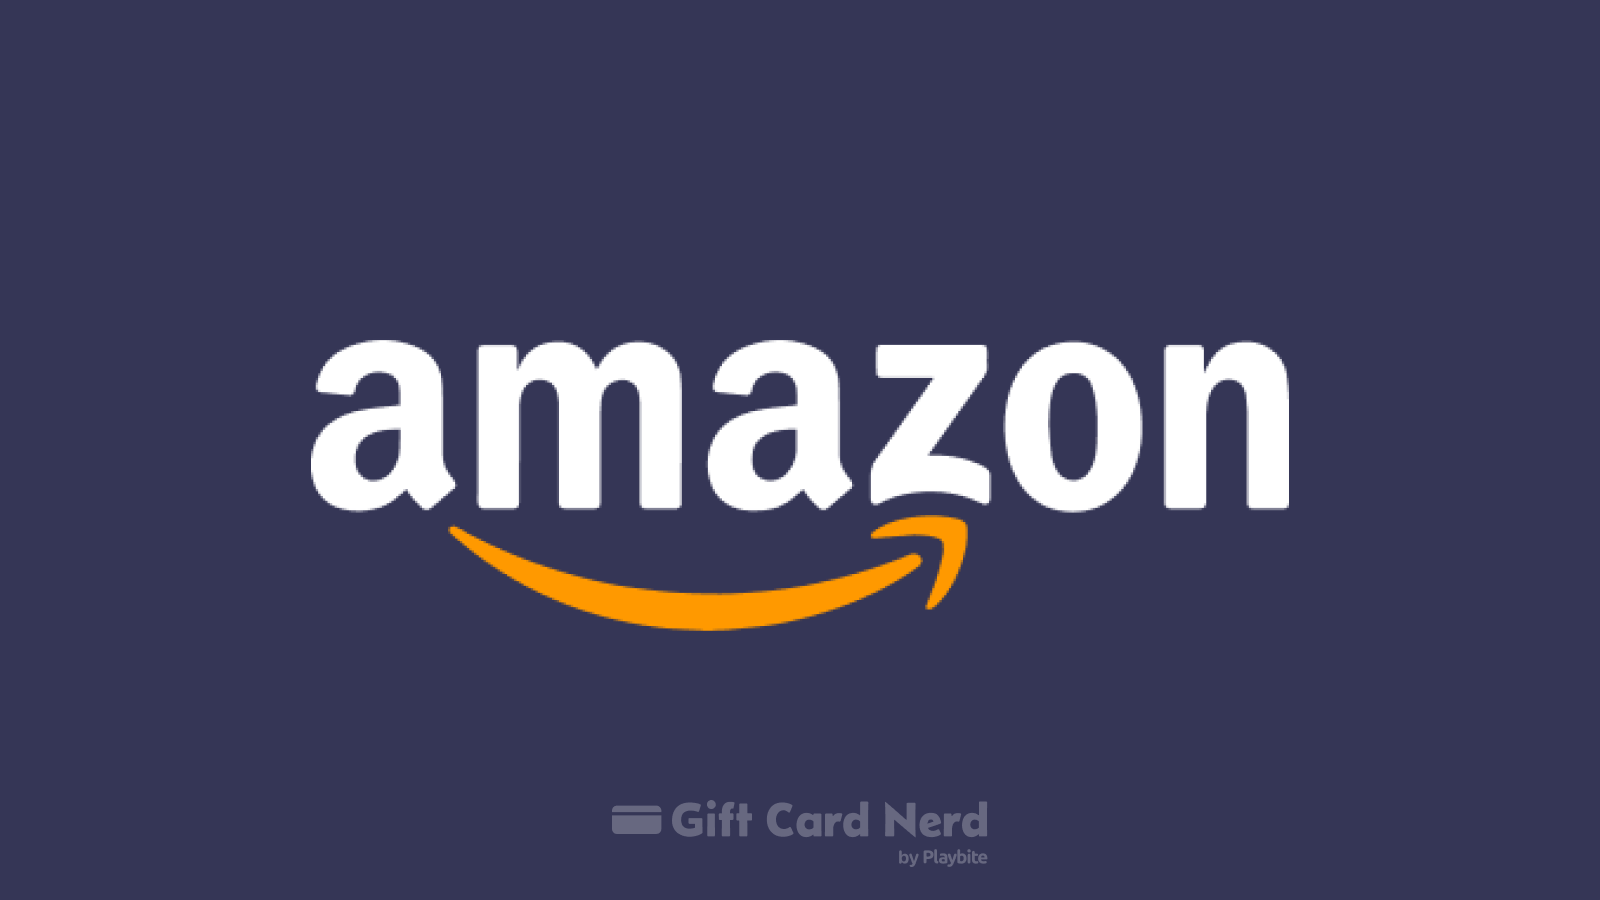 Can I Use an Amazon Gift Card on Venmo?